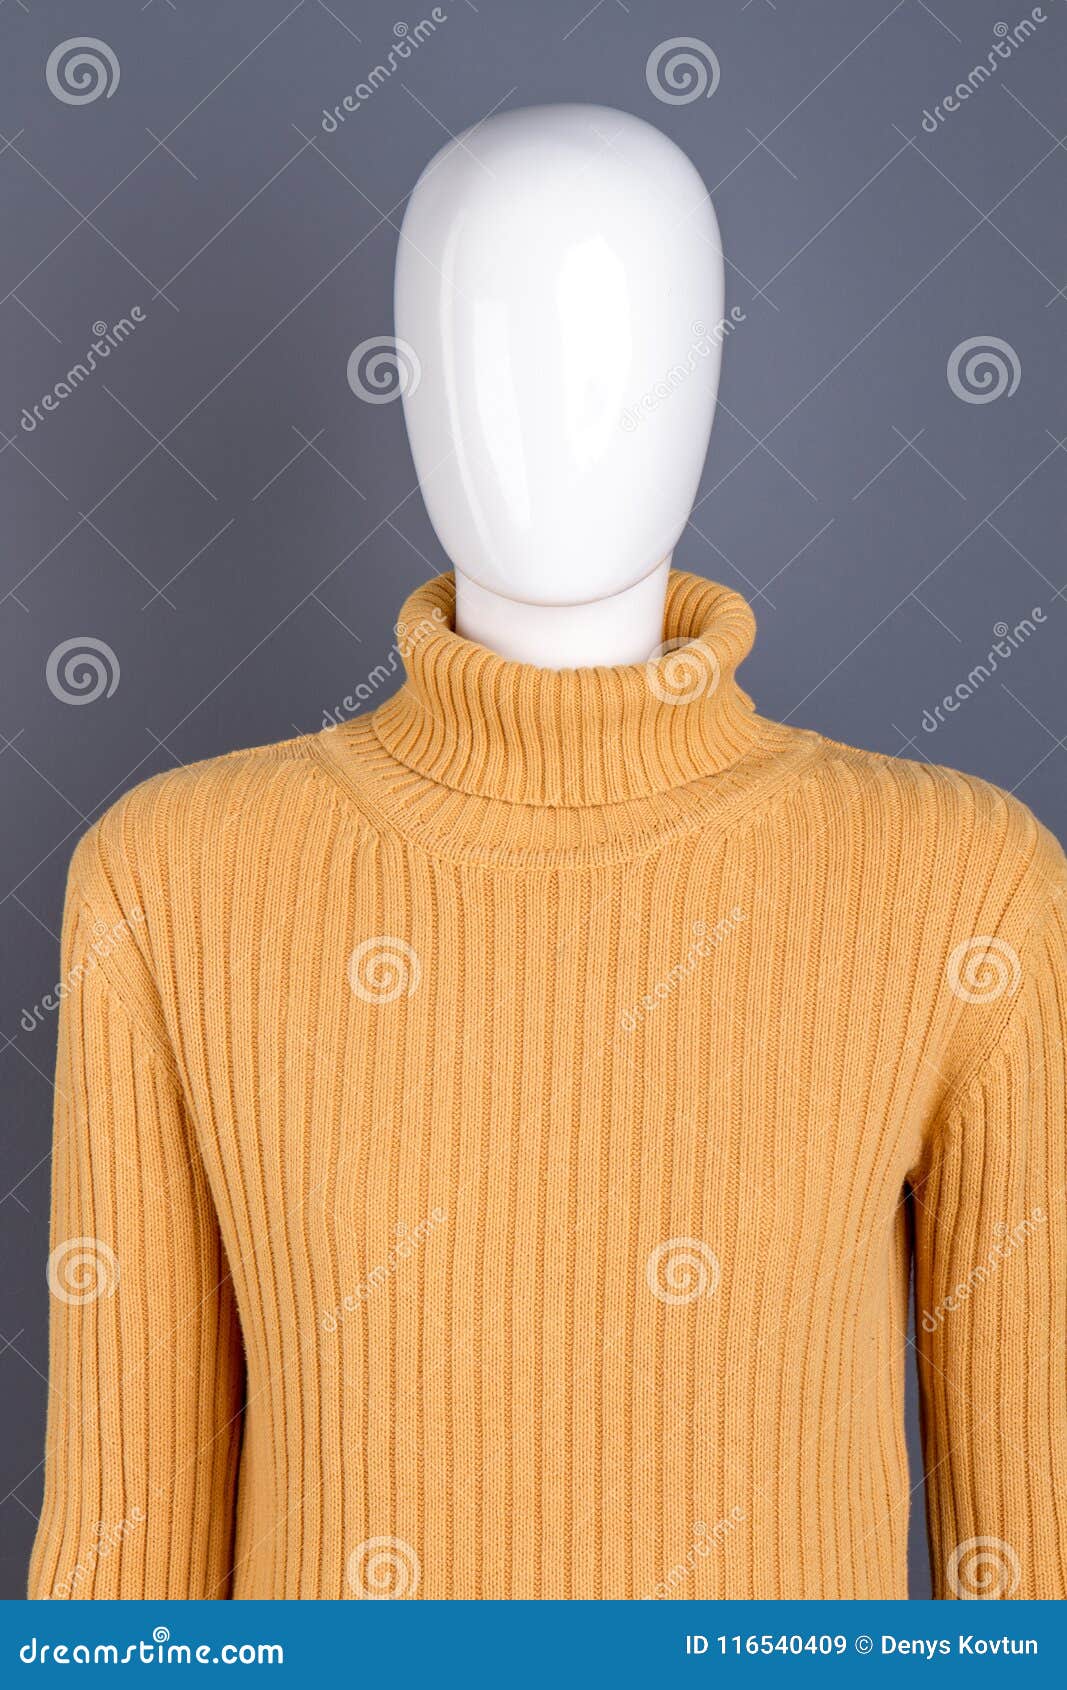 Mannequin Dressed in Women Yellow Sweater. Stock Image - Image of ...